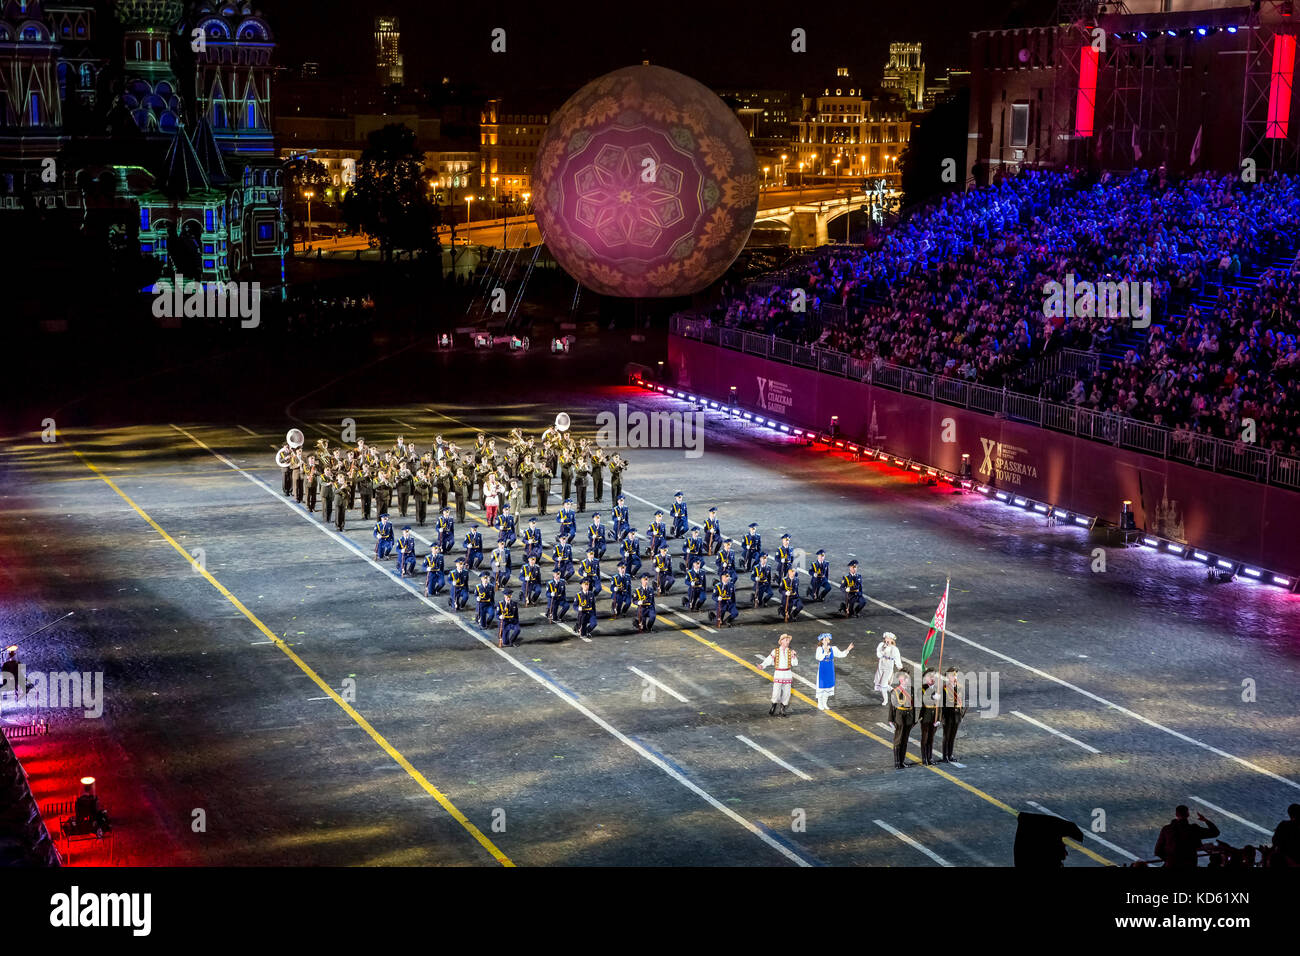 Performance of The Honor Guard and the Band of the Armed Forces of the Republic of Belarus on International Military Tattoo Music Festival “Spasskaya Tower” in Moscow, Russia Stock Photo